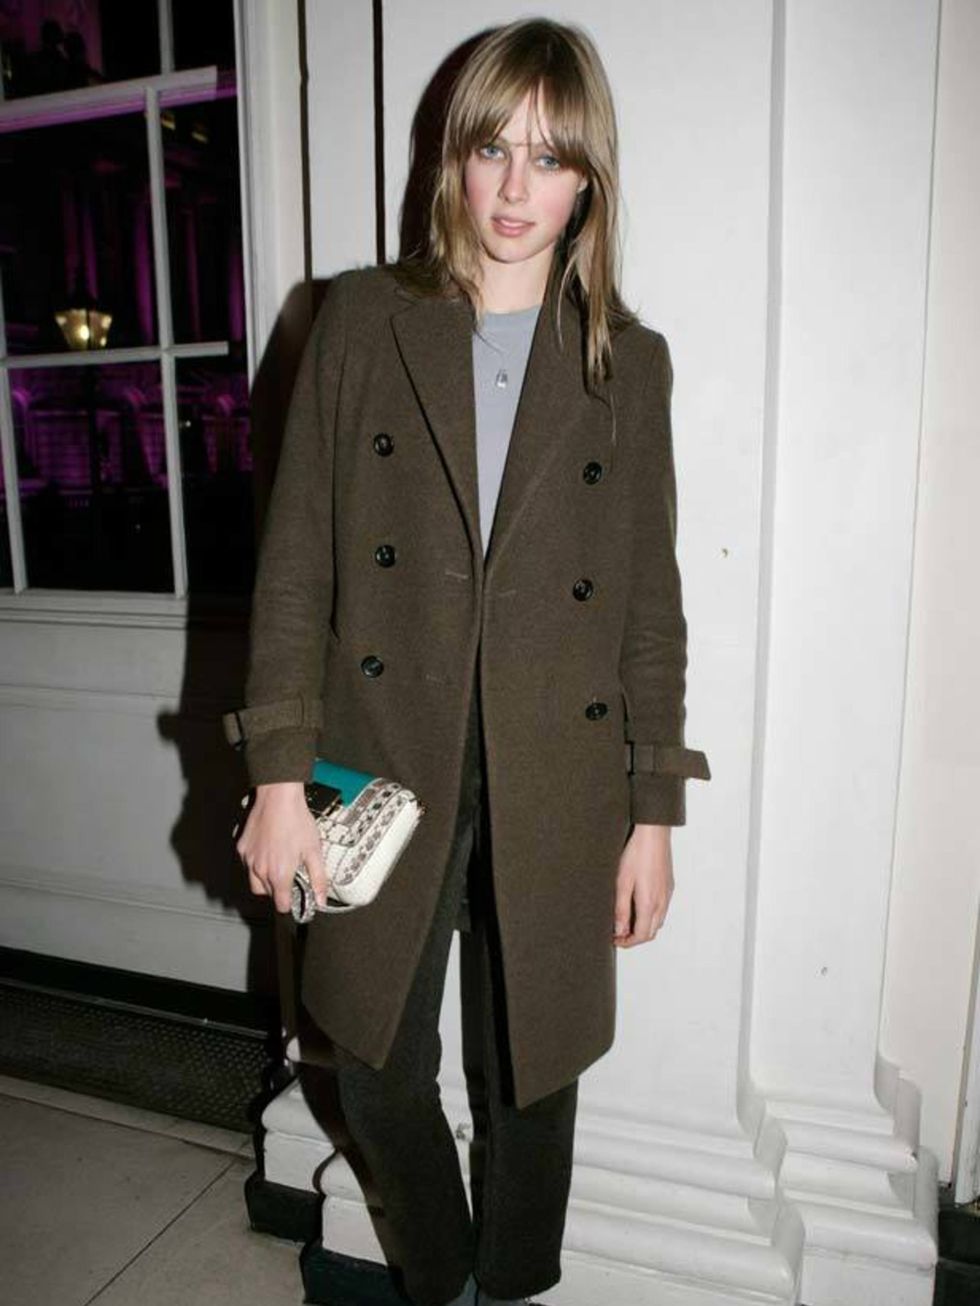 <p>We have developed a near obsession with fashions latest darling. Those big eyes, disdainful pout and a consistently flawless style have made Edie Campbell our new girl crush. On or off duty, the model girlfriend of rocker Johnny Borrell never fails to